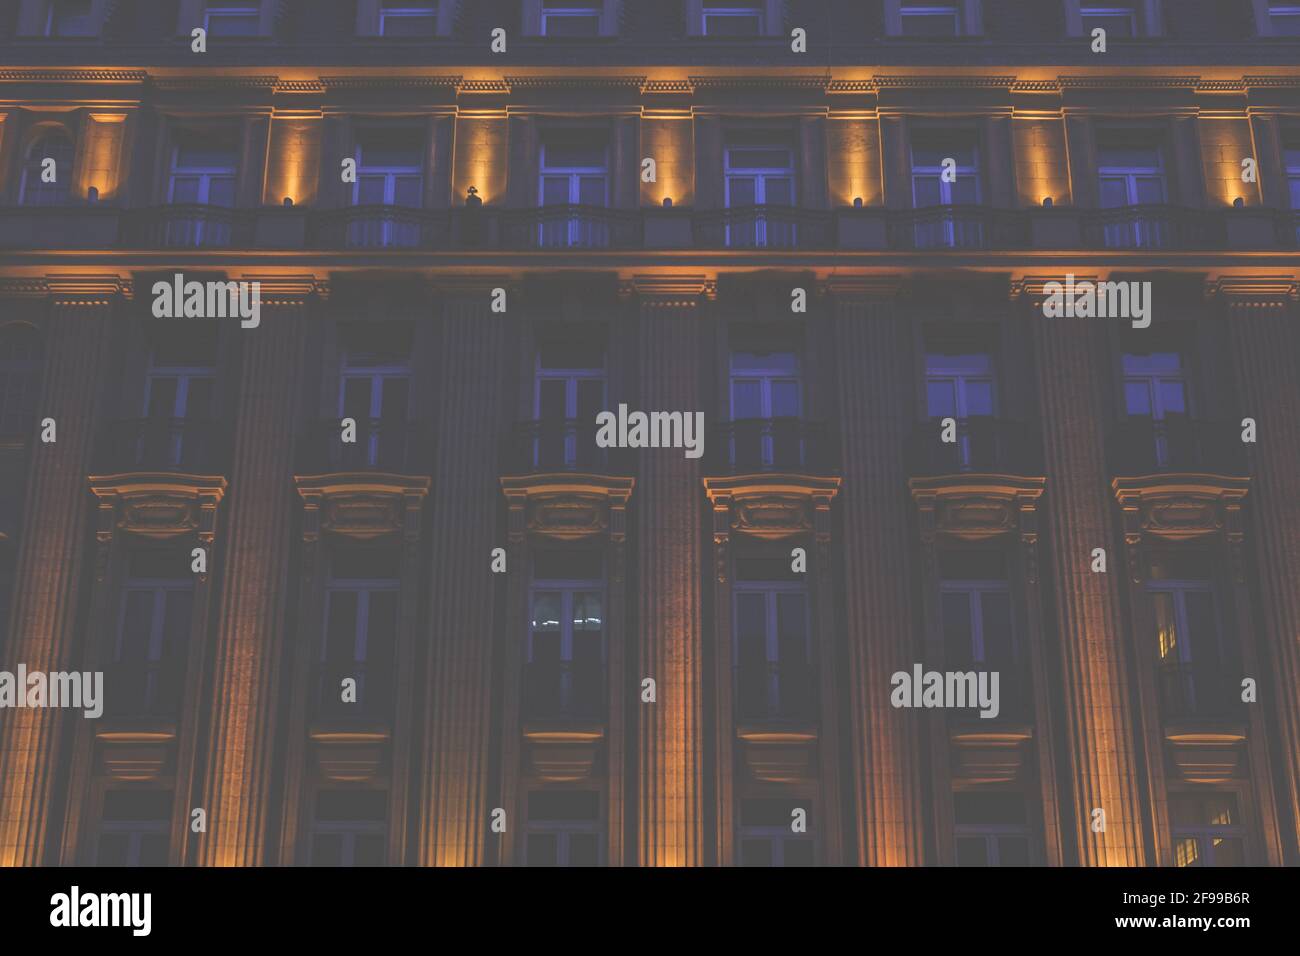 Illuminated exterior facade of a house in the classical style at night, Cologne, Germany, Europe Stock Photo